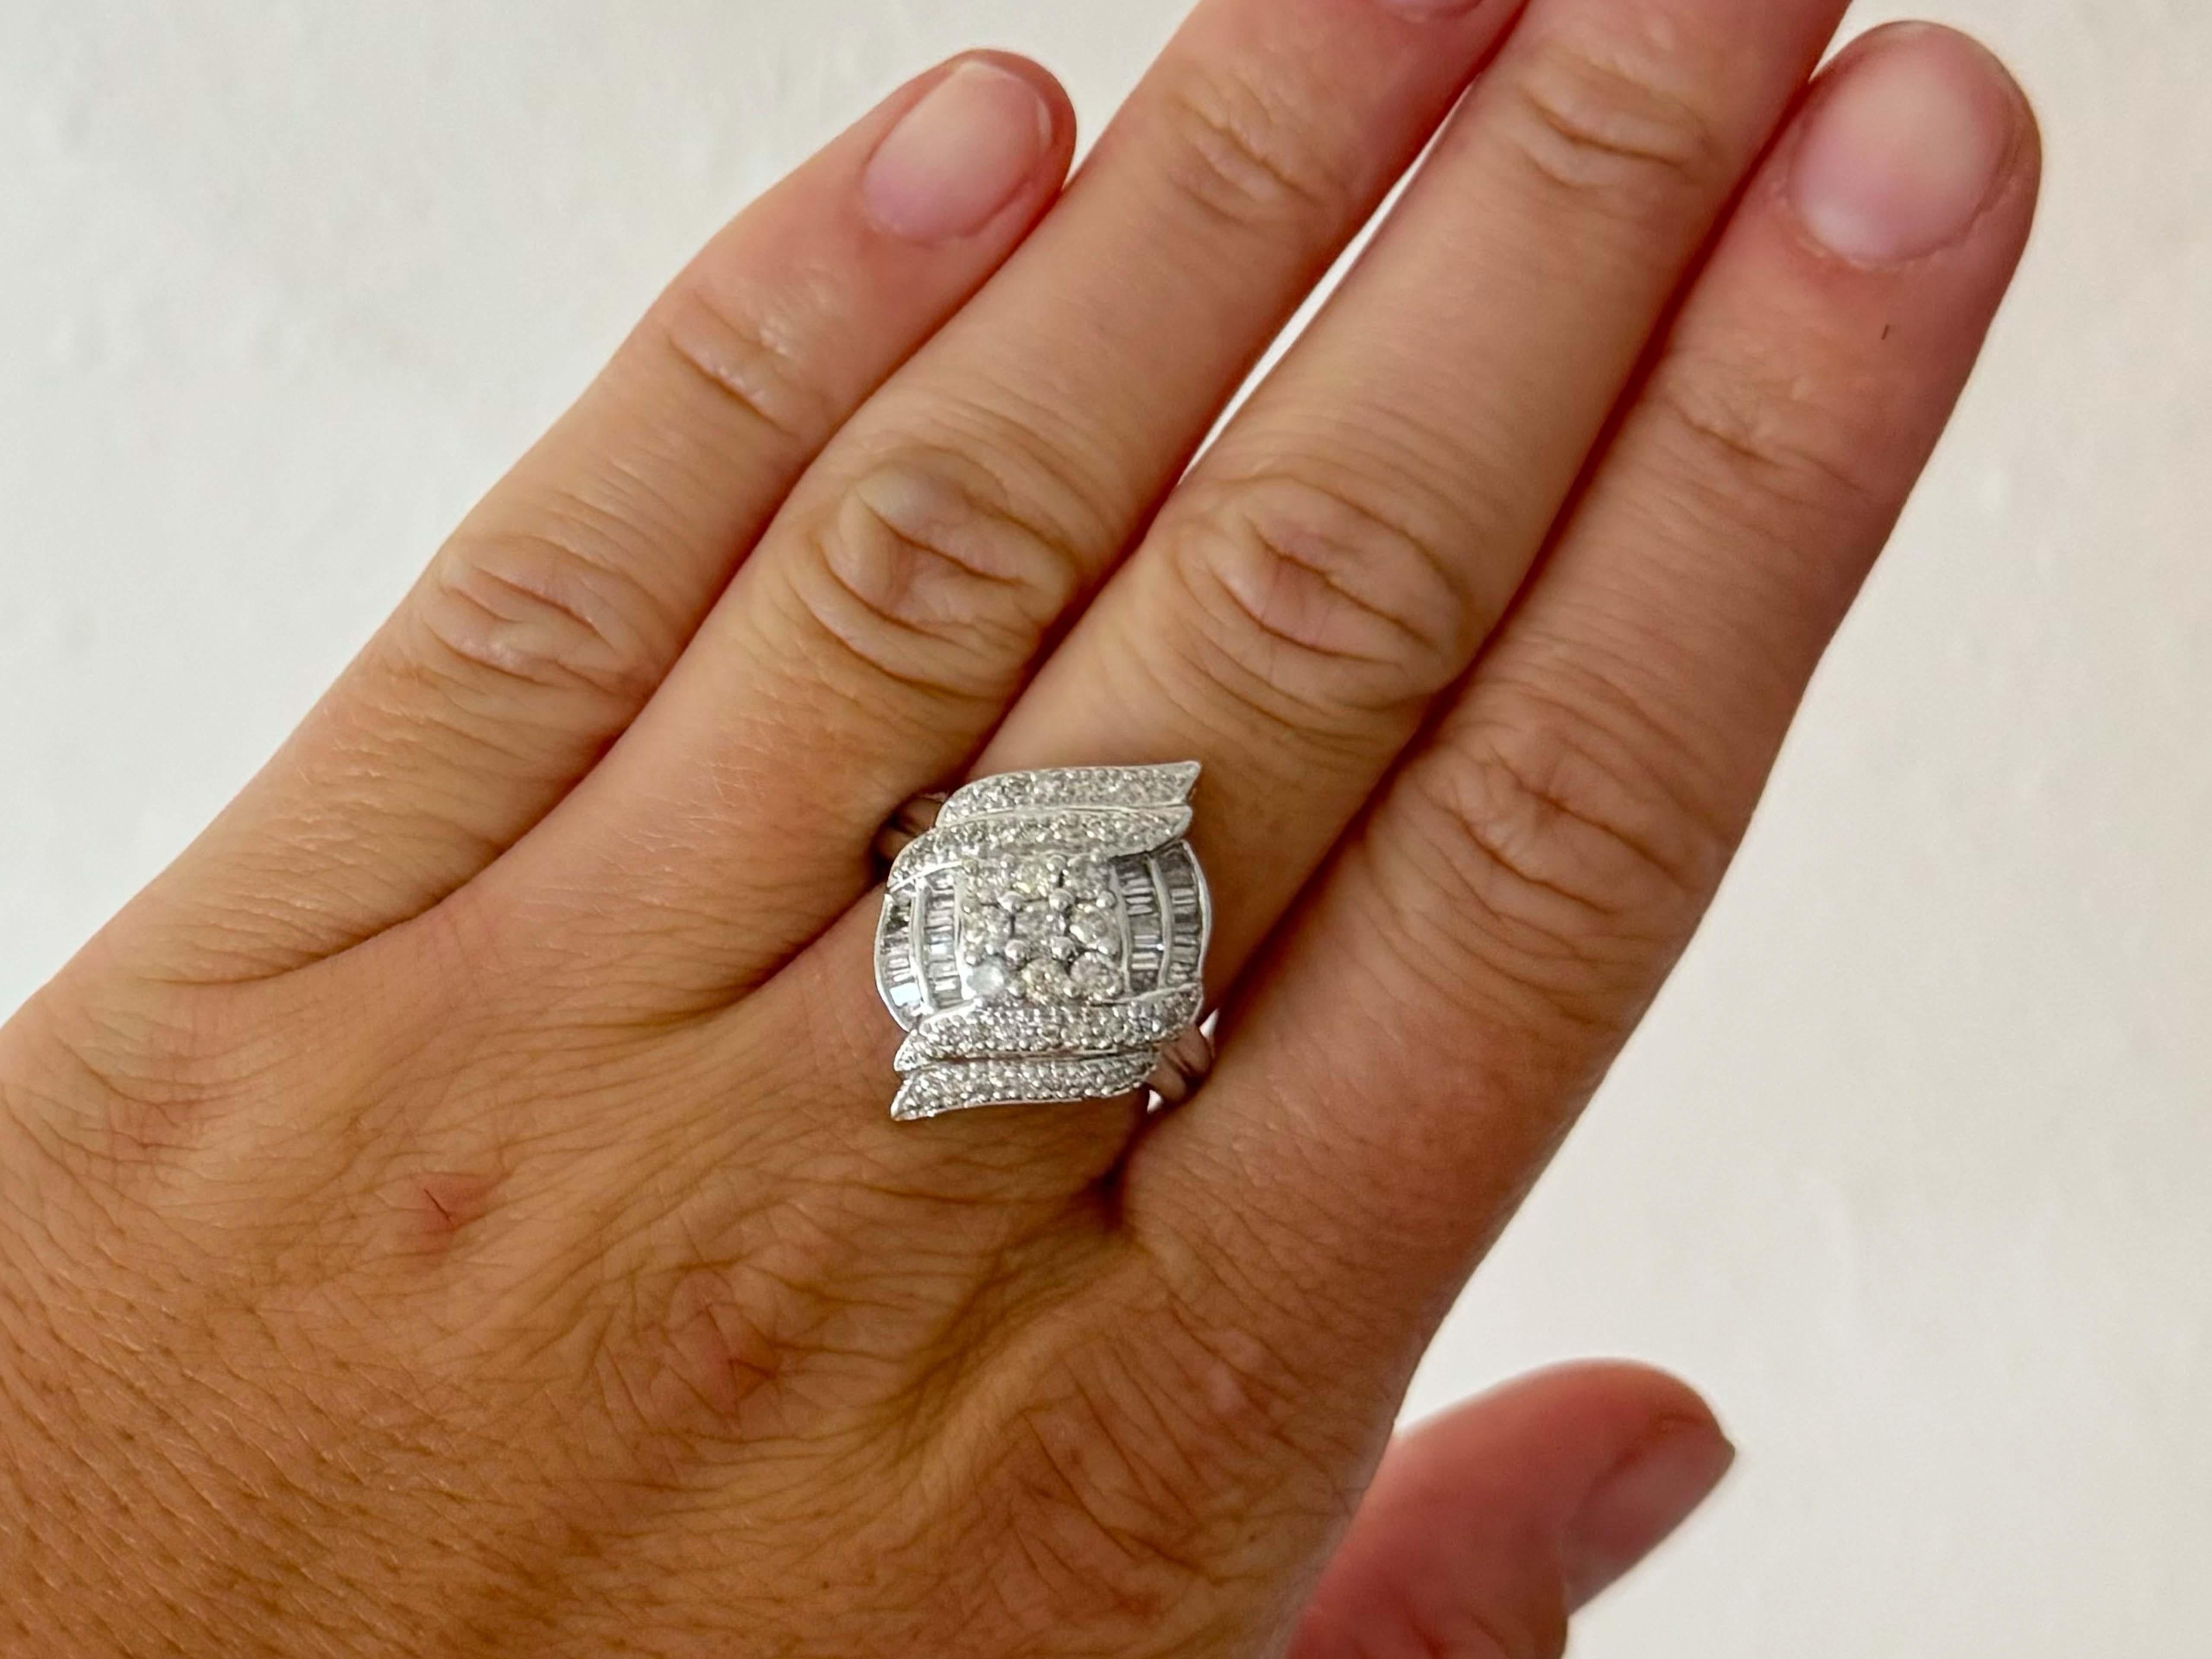 Item Specifications:

Metal: 18k White Gold

Total Diamond Carat Weight: 1.15 carats 

Diamond Color: G-H

Diamond Clarity: SI1-I2

Ring Size: 7.25

Total Weight: 8.2 Grams

Stamped: 